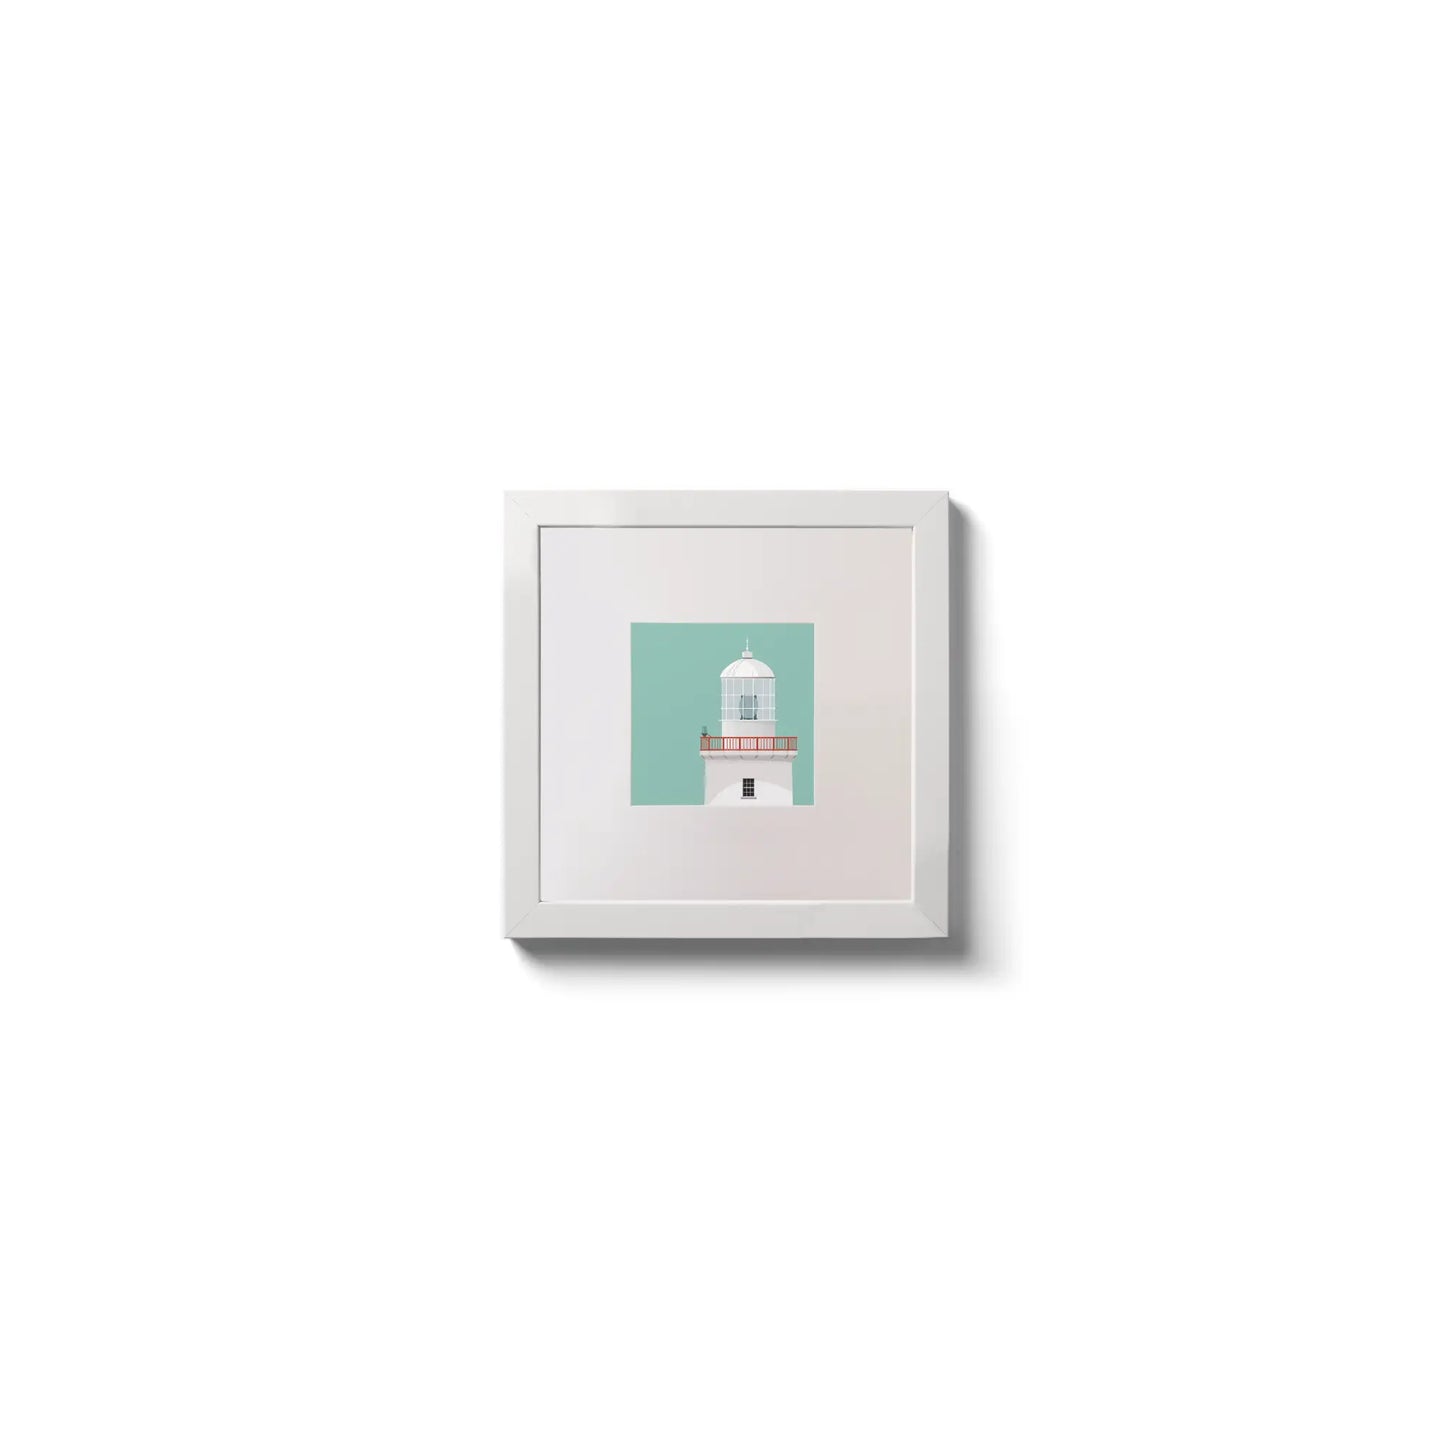 Illustration of Arranmore lighthouse on an ocean green background,  in a white square frame measuring 10x10cm.